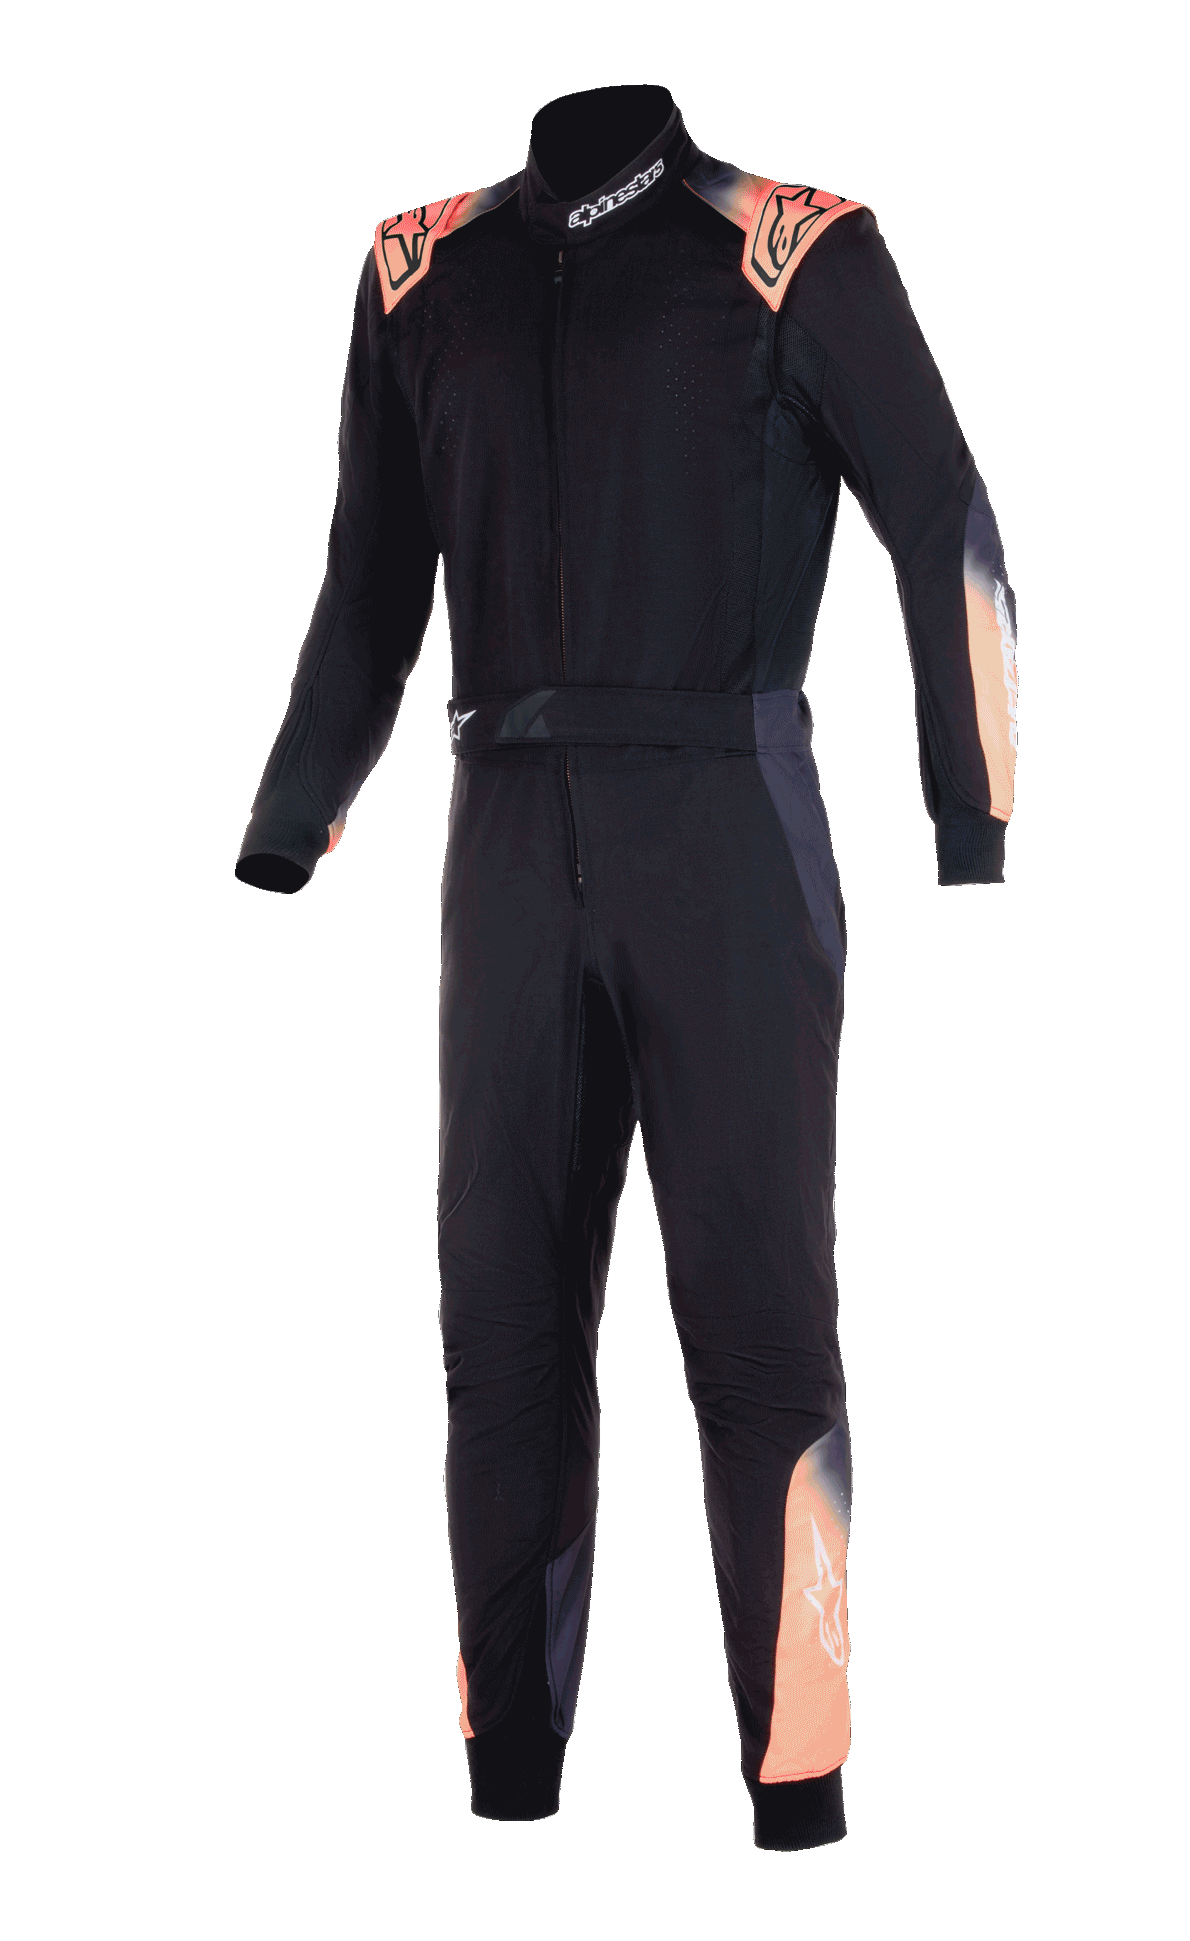 Karting Suits | Alpinestars® Official Site